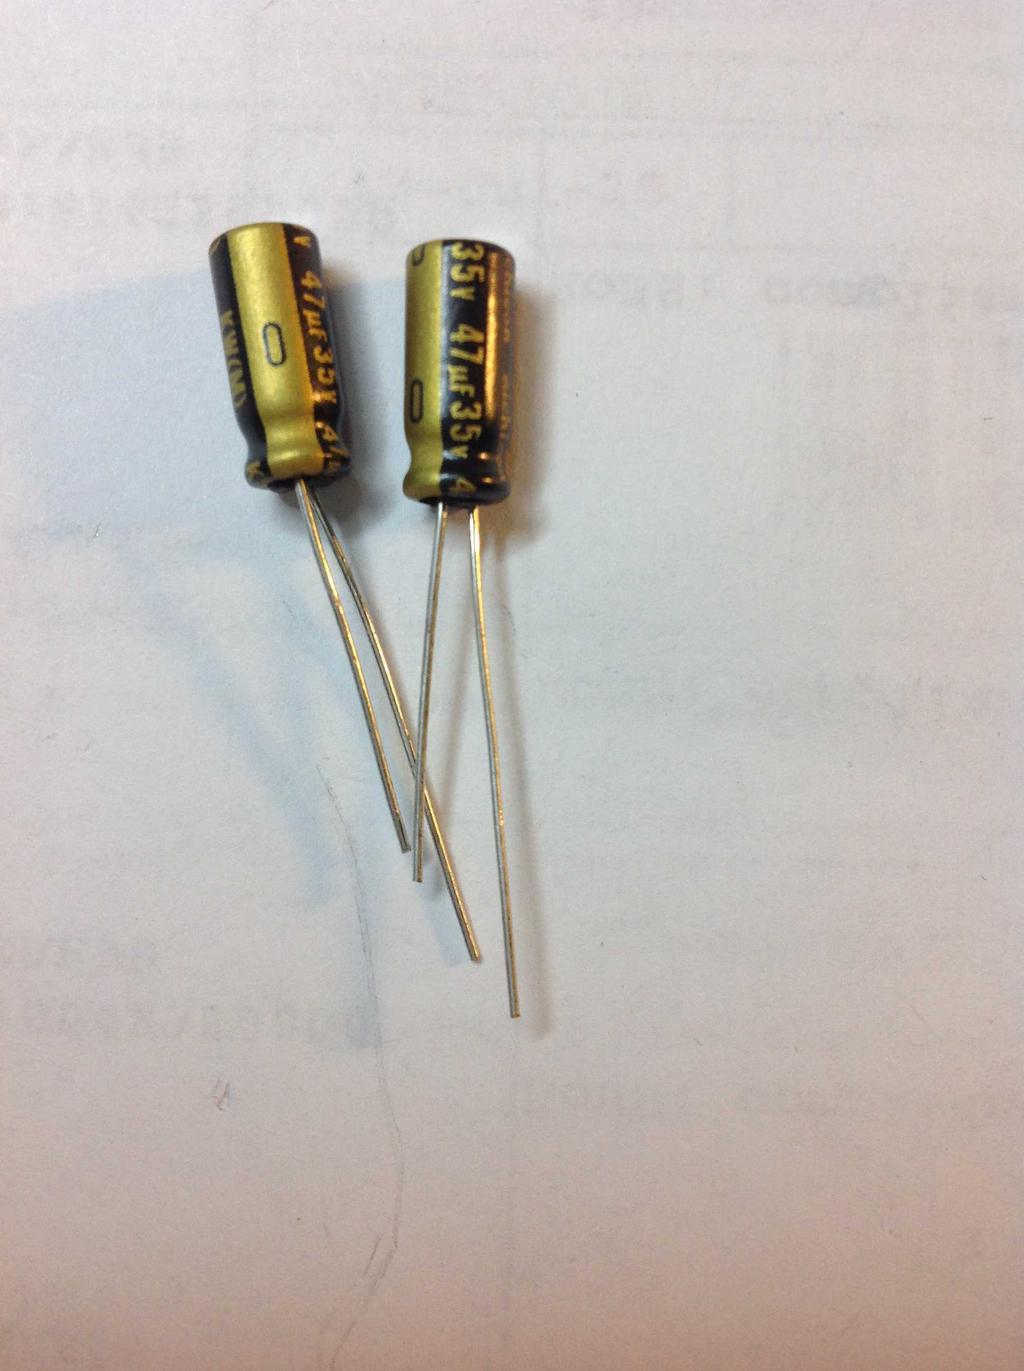 Now install the two 47uF electrolytic capacitors, C9 and C10.